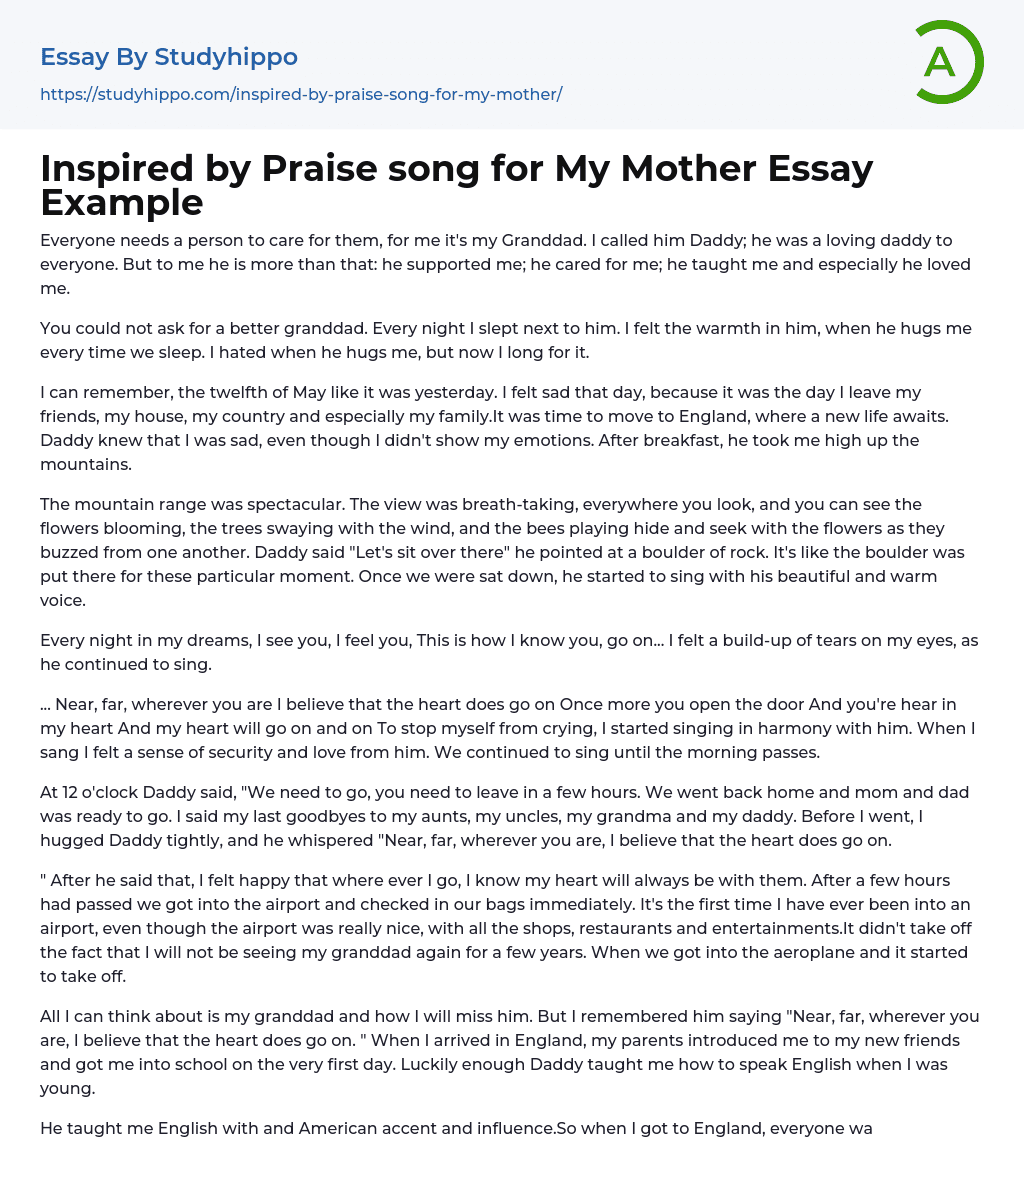 Inspired by Praise song for My Mother Essay Example